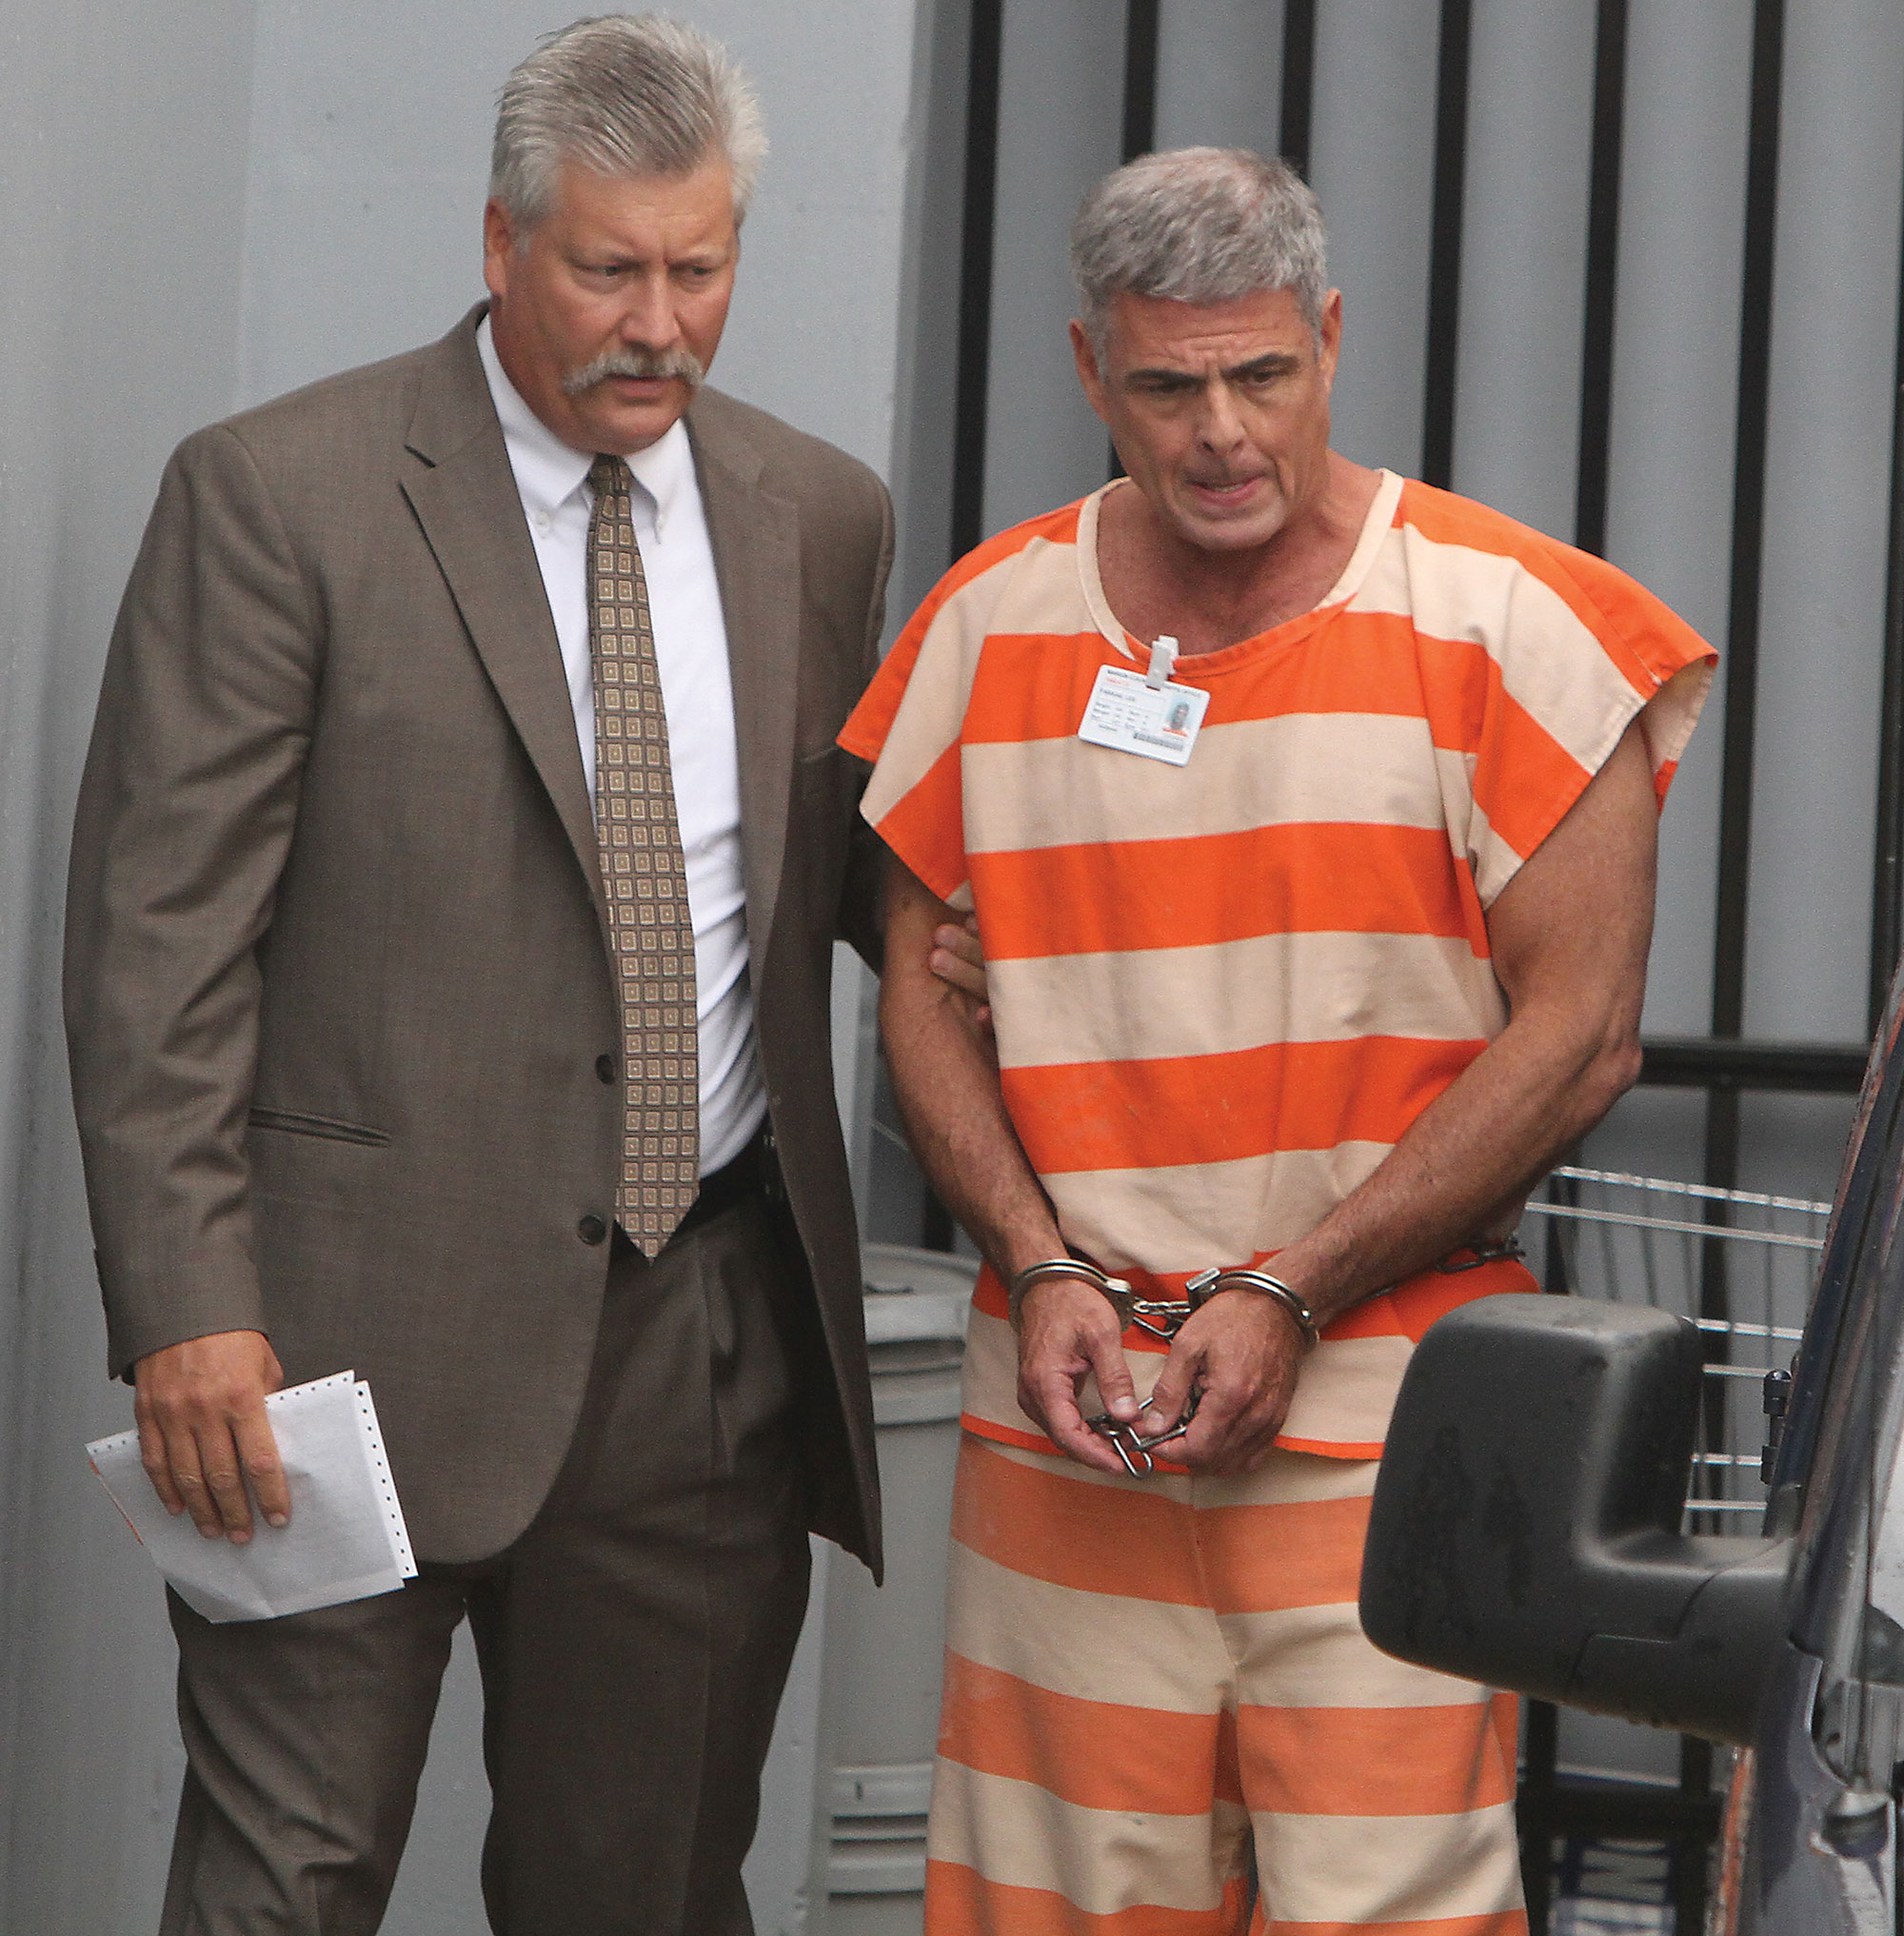 A photo shows a handcuffed Lee Farkas in prison clothes, standing with his lawyer.